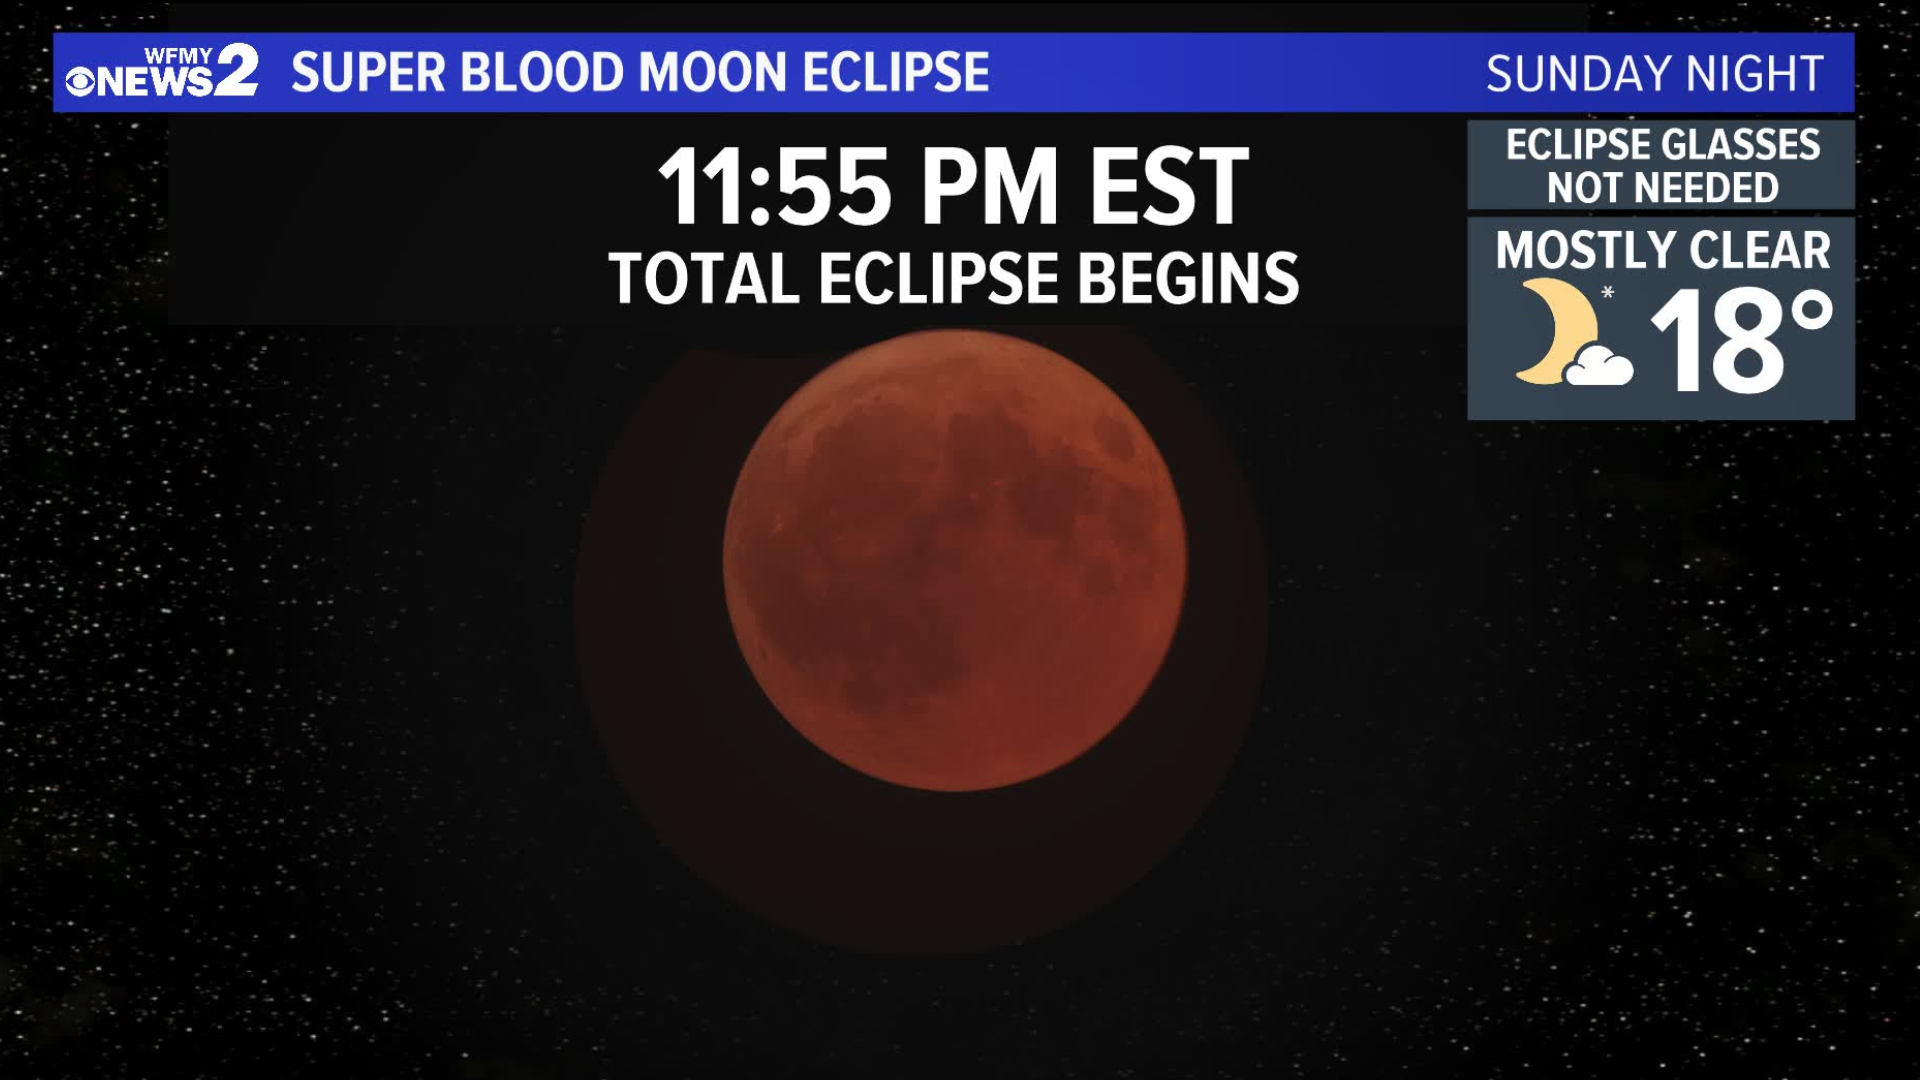 The eclipse will start Sunday night and will officially end early Monday morning. It will be super cold during viewing, but most in the Piedmont Triad should be able to see the Super Wolf Blood Moon Lunar Eclipse.